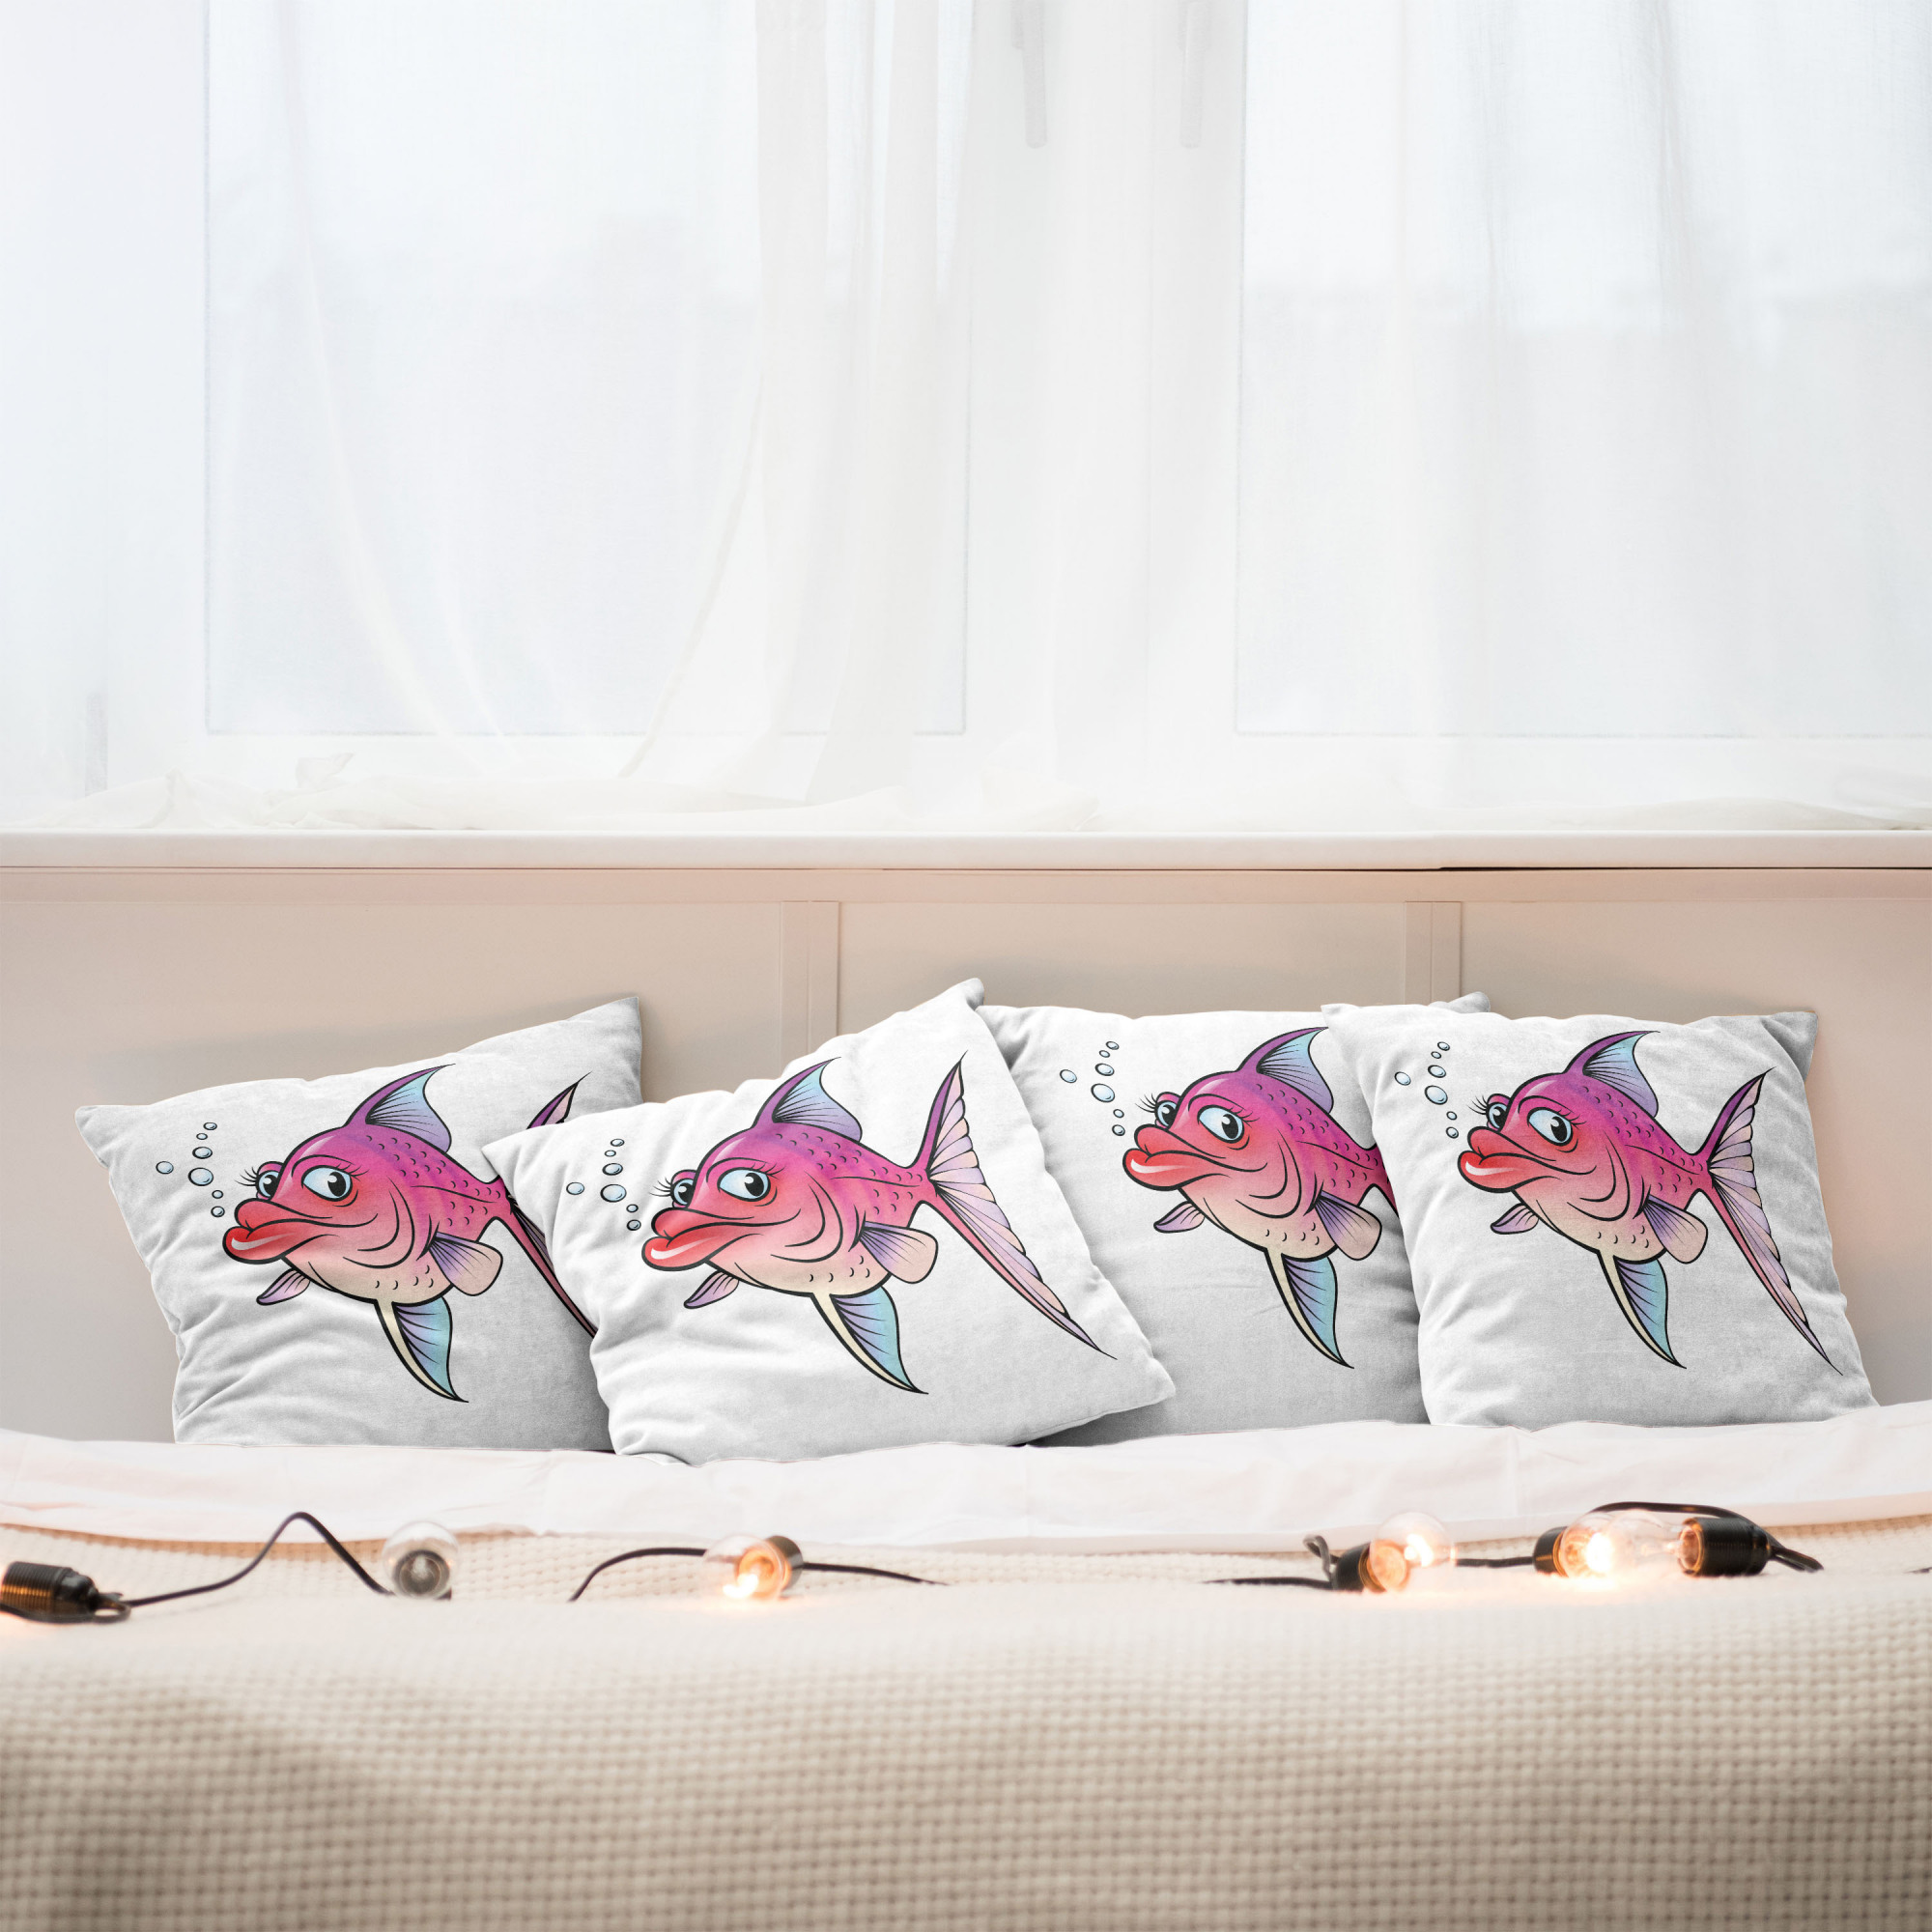 Ambesonne Fish Cushion Cover Set of 4 for Couch and Bed in 4 Sizes